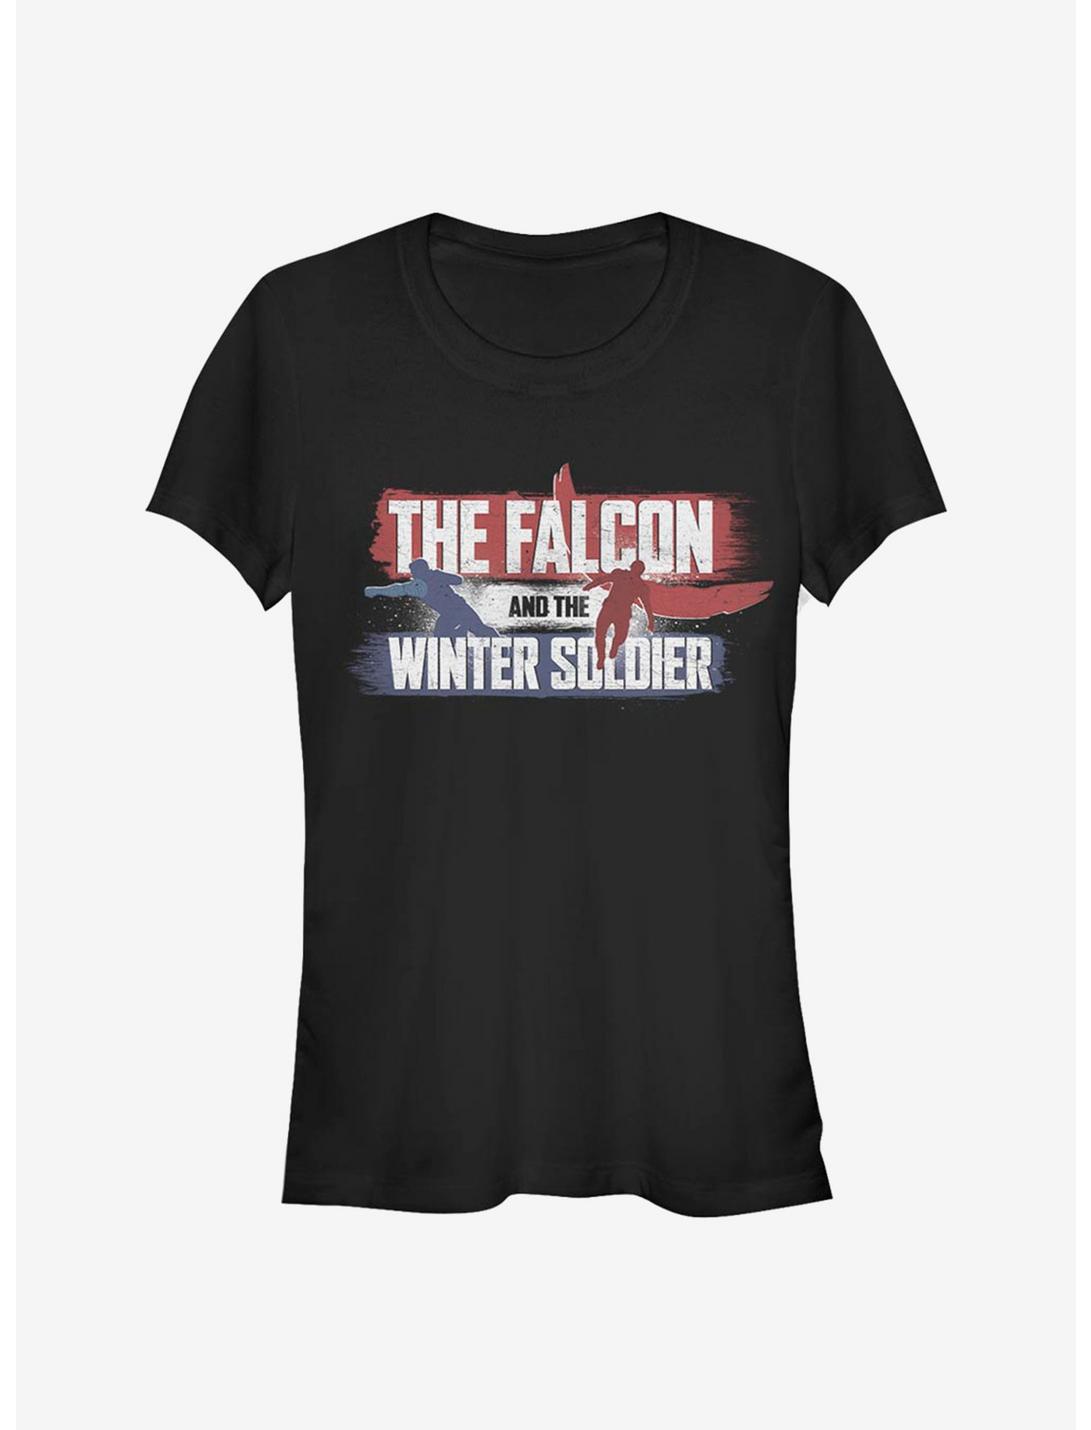 Marvel The Falcon And The Winter Soldier Spray Paint Girls T-Shirt, BLACK, hi-res